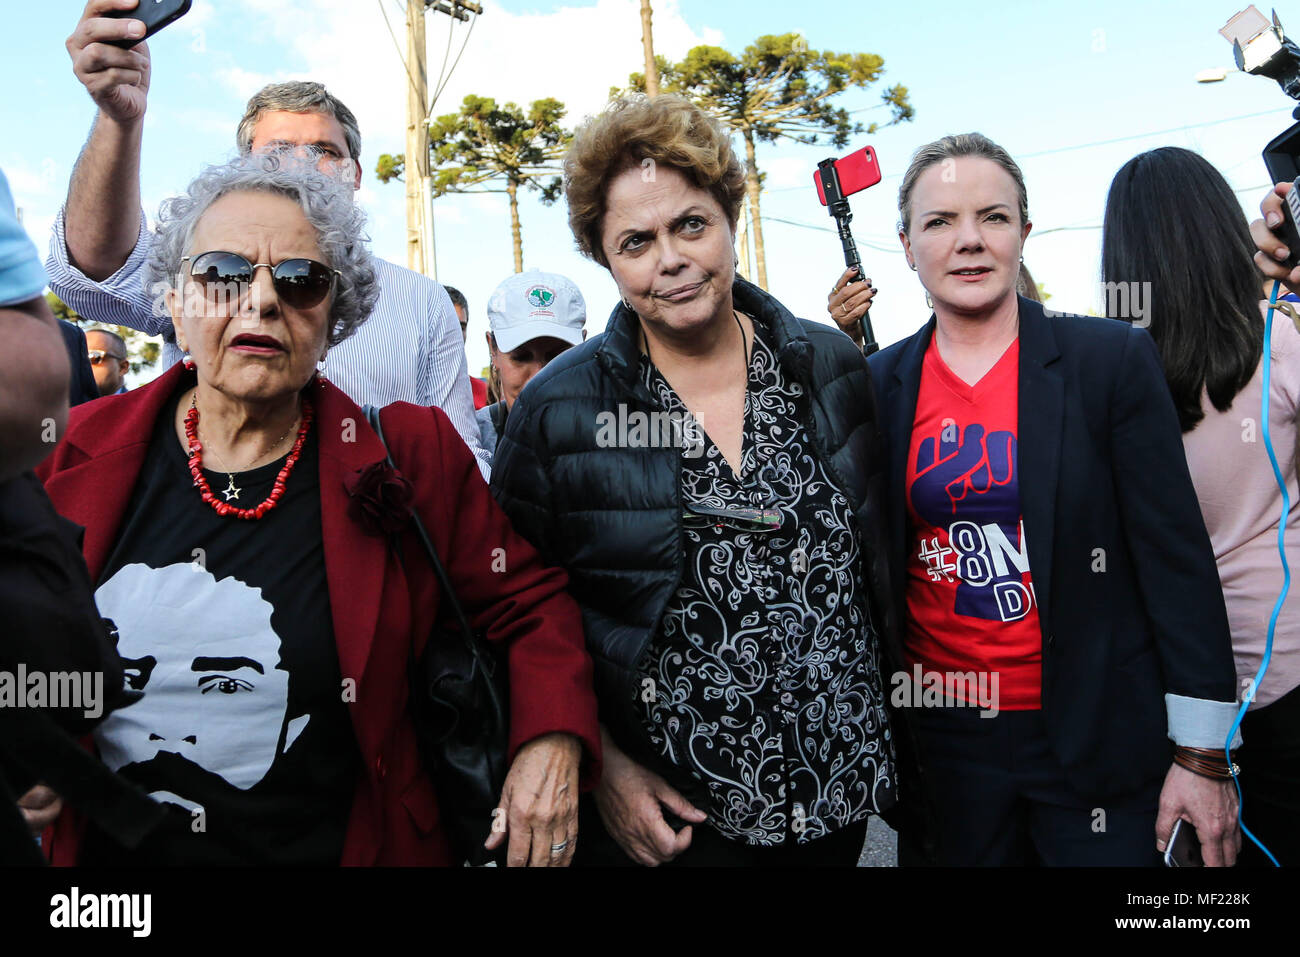 April 23, 2018 - Curitiba, ParanÃ, Brasil - Former president Dilma Rousseff (c), along with Senator Gleisi Hoffman (R), among other parliamentarians, leaves the headquarters of the Superintendency of the Federal Police, in Curitiba (PR), where he tried to visit former president Lula. Credit: Agb Geraldo Bubniak/ZUMA Wire/Alamy Live News Stock Photo